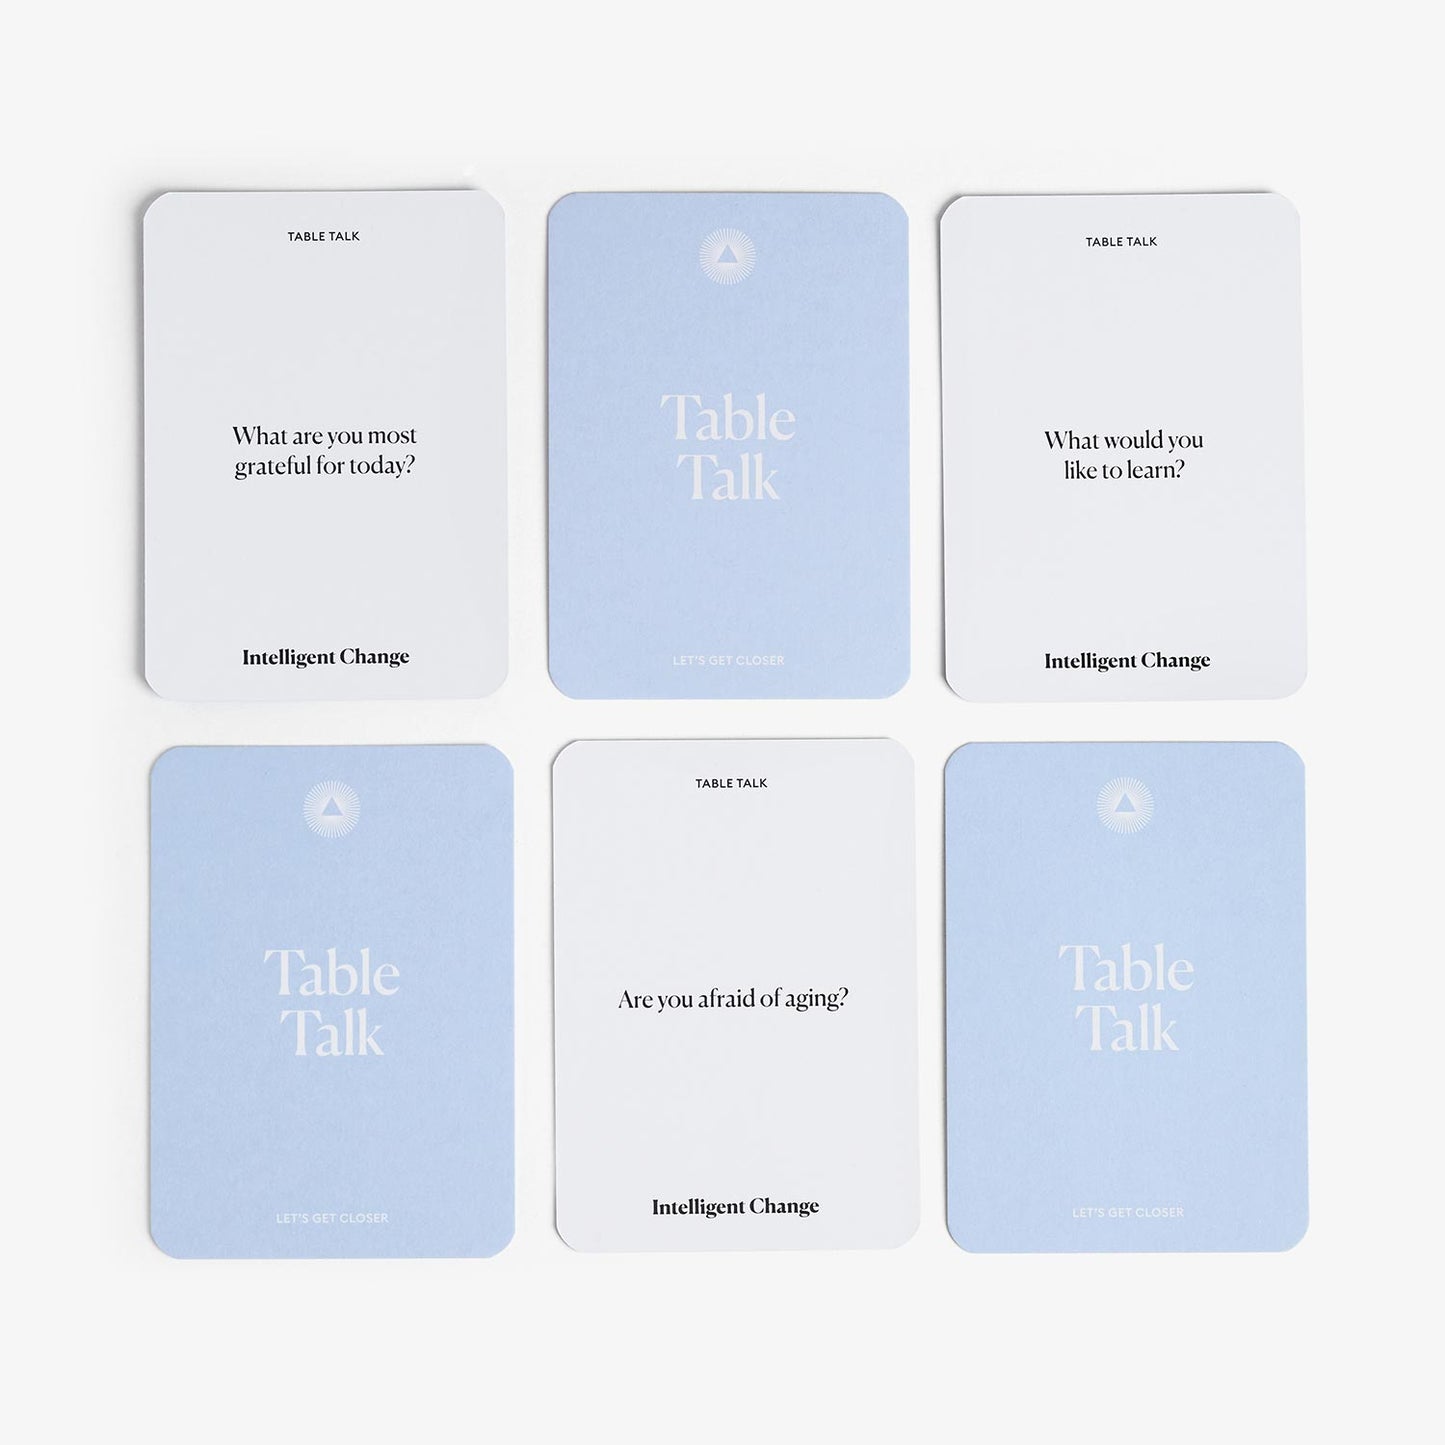 Get Closer Table Talk Question Card Game